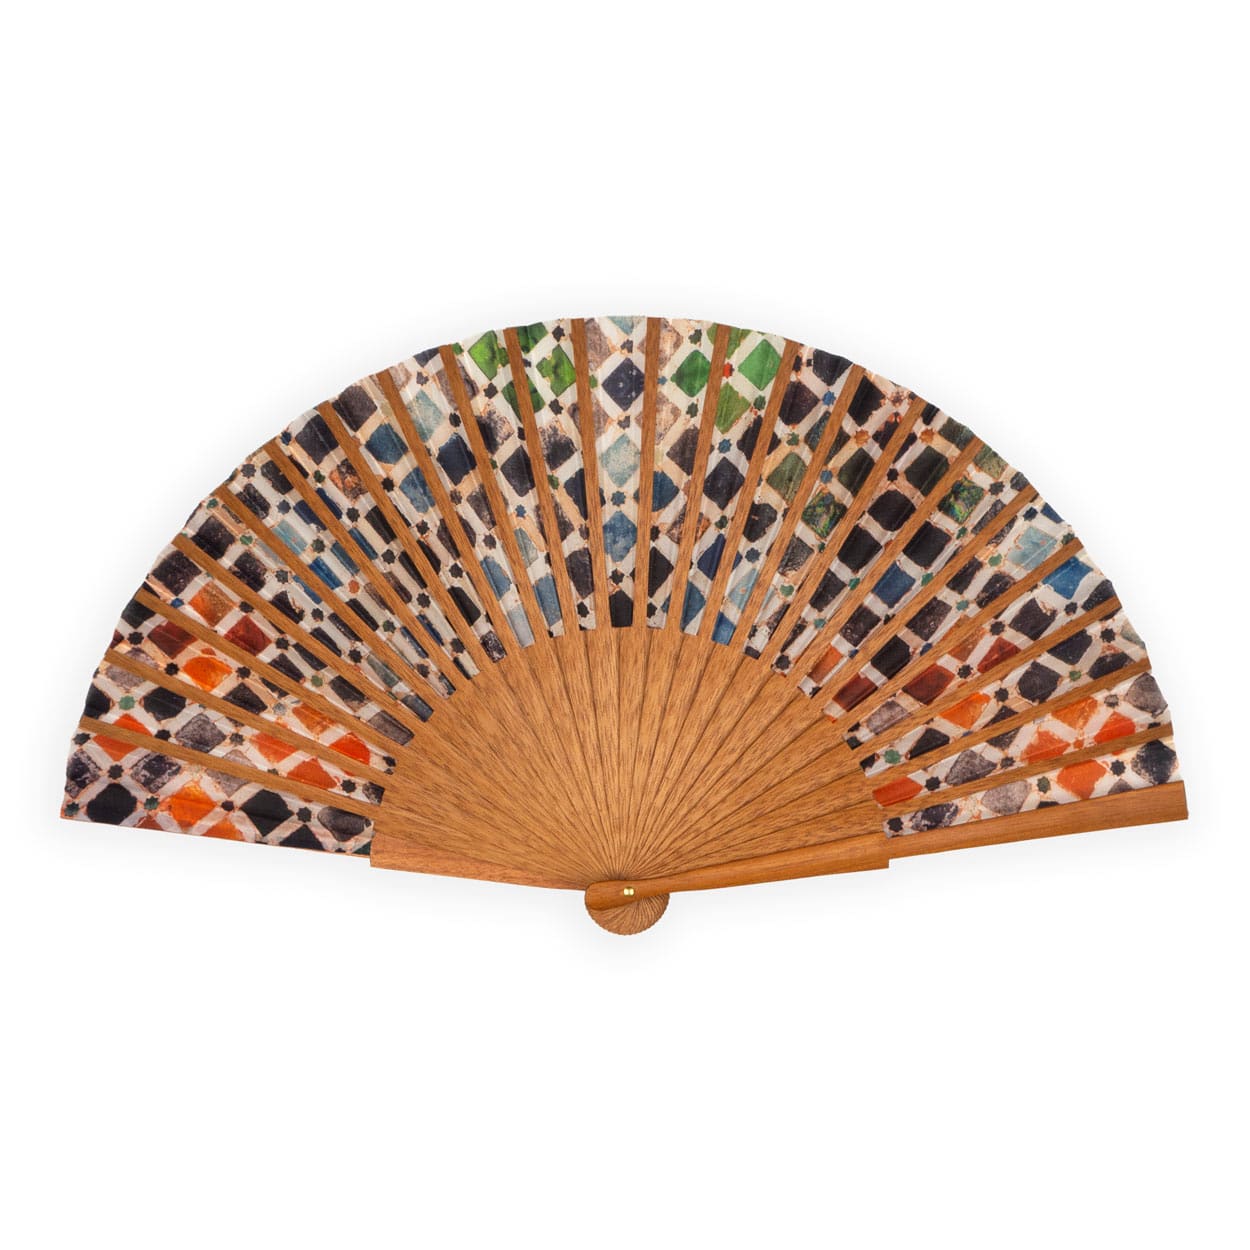 Colorful folding fan inspired by Andalusian mosaic tiles